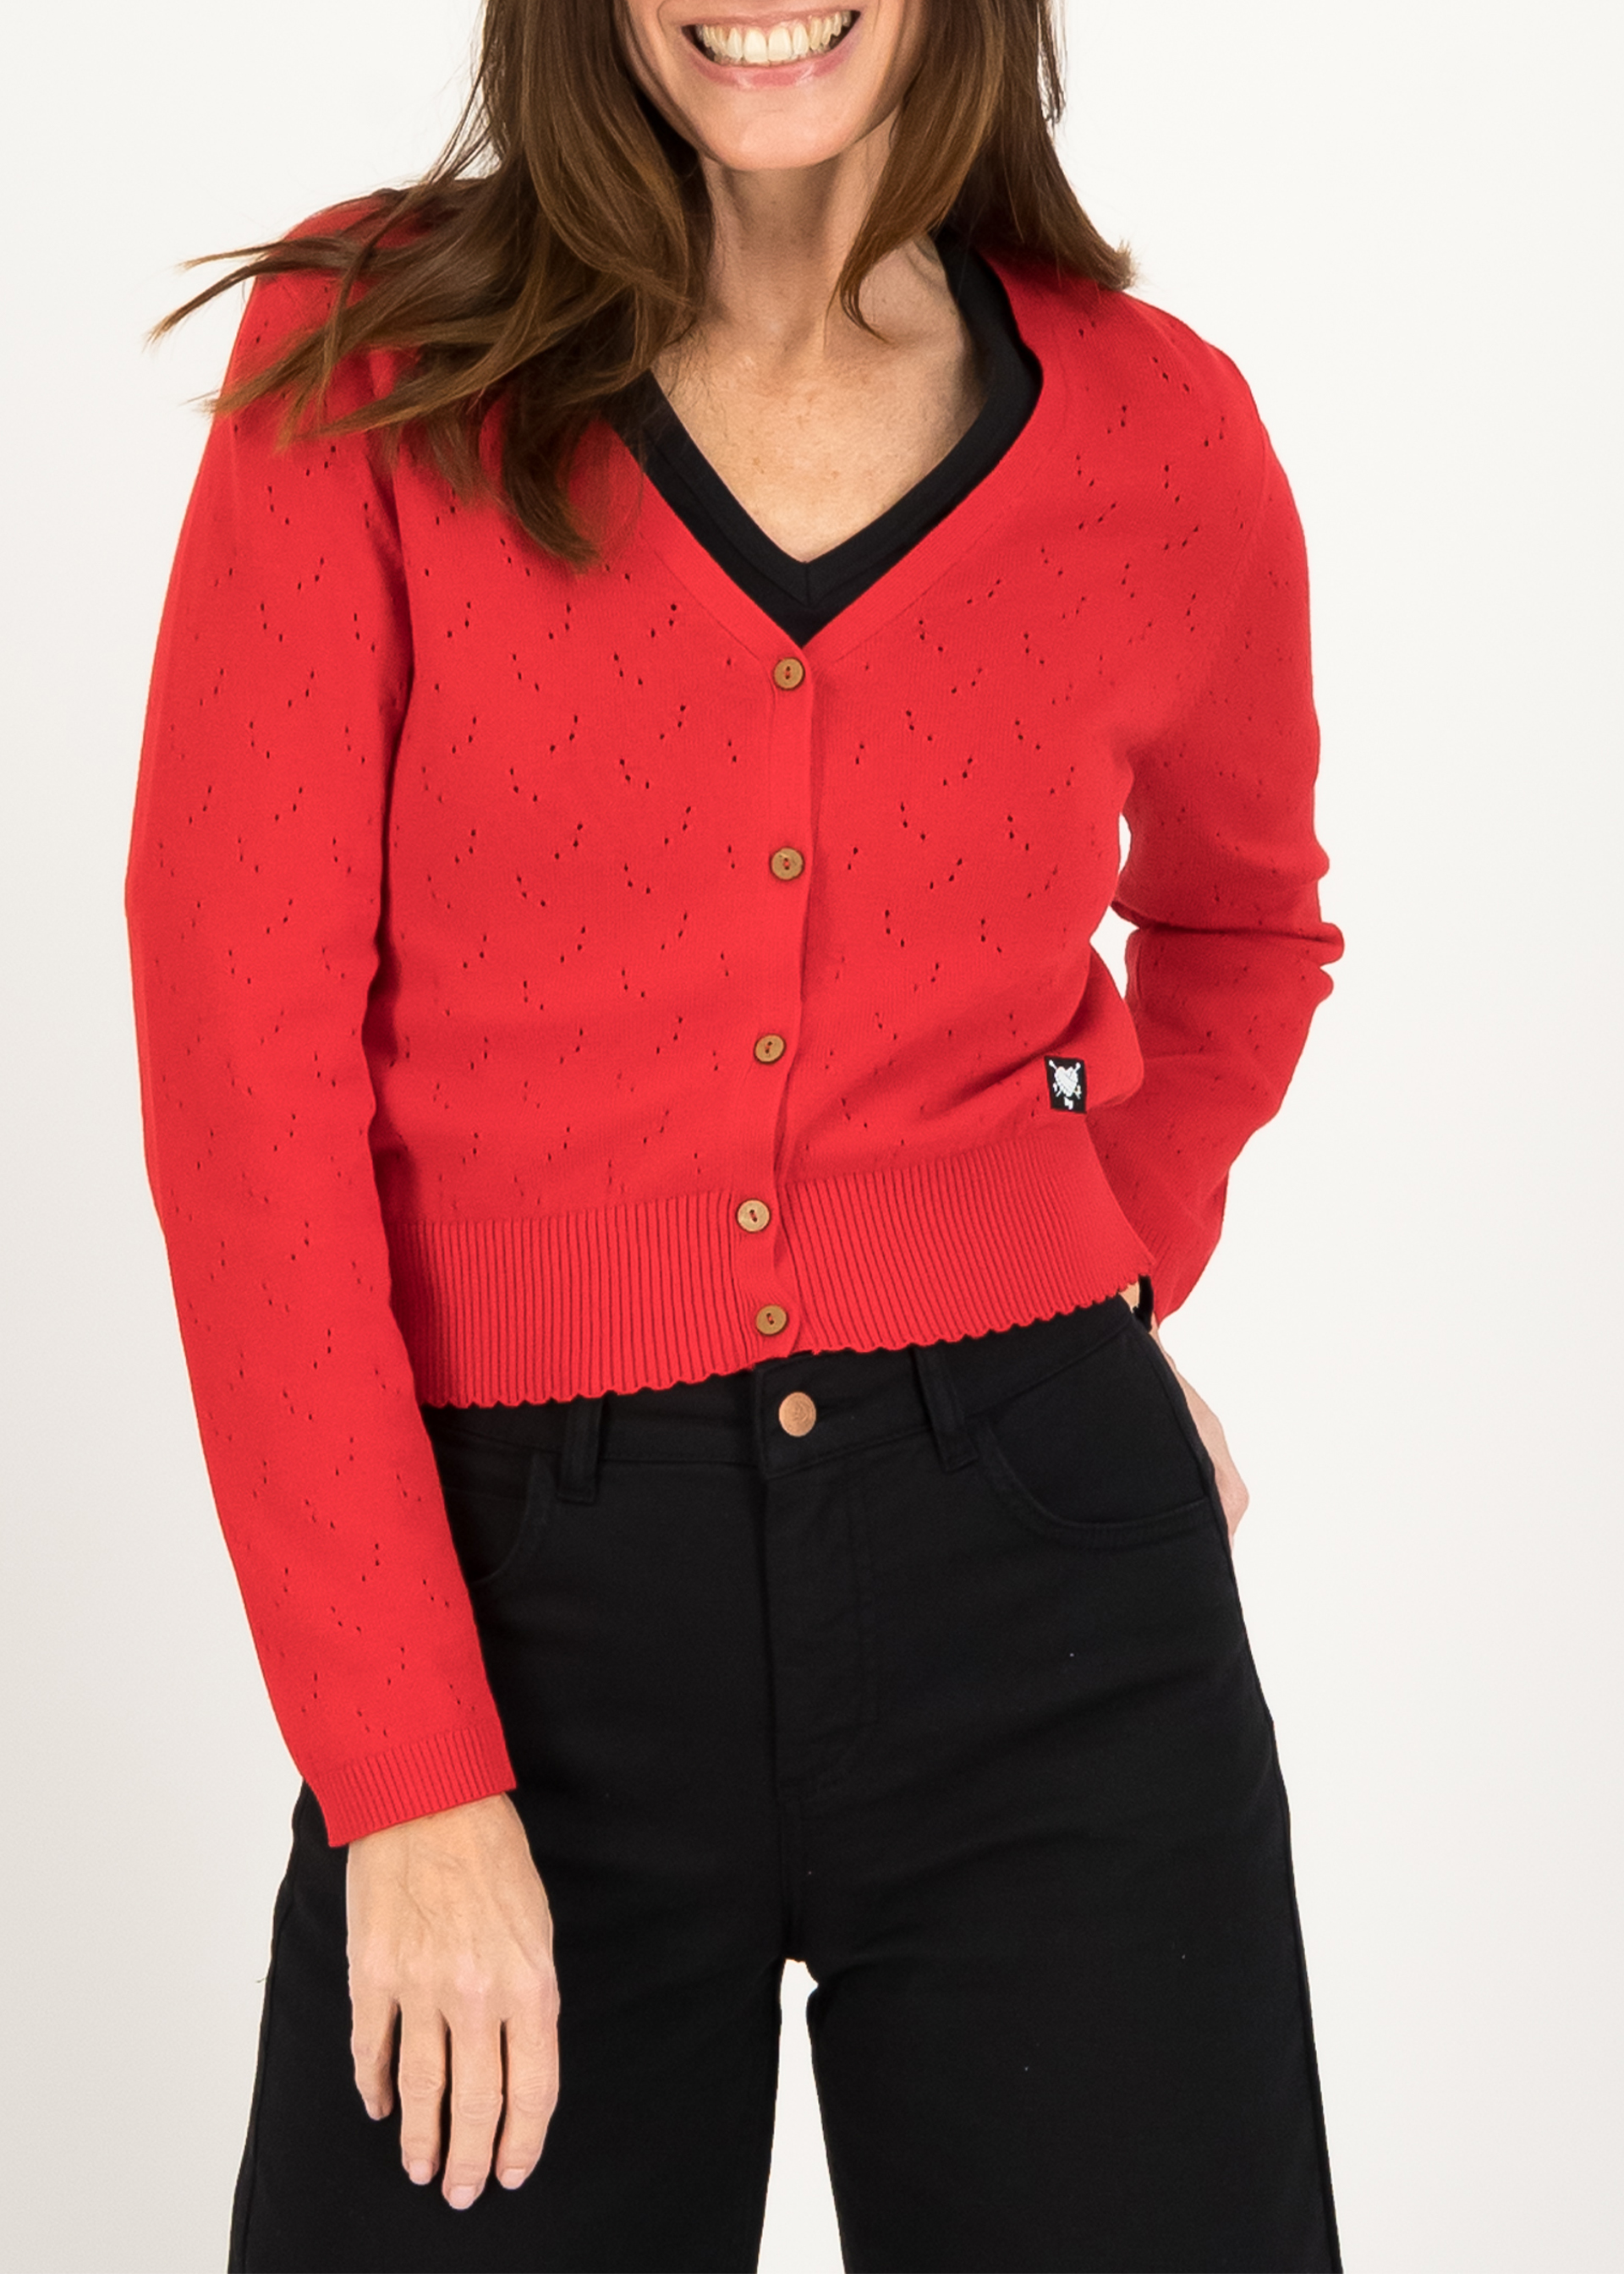 Cardigan Save the World -  stunningly red knit